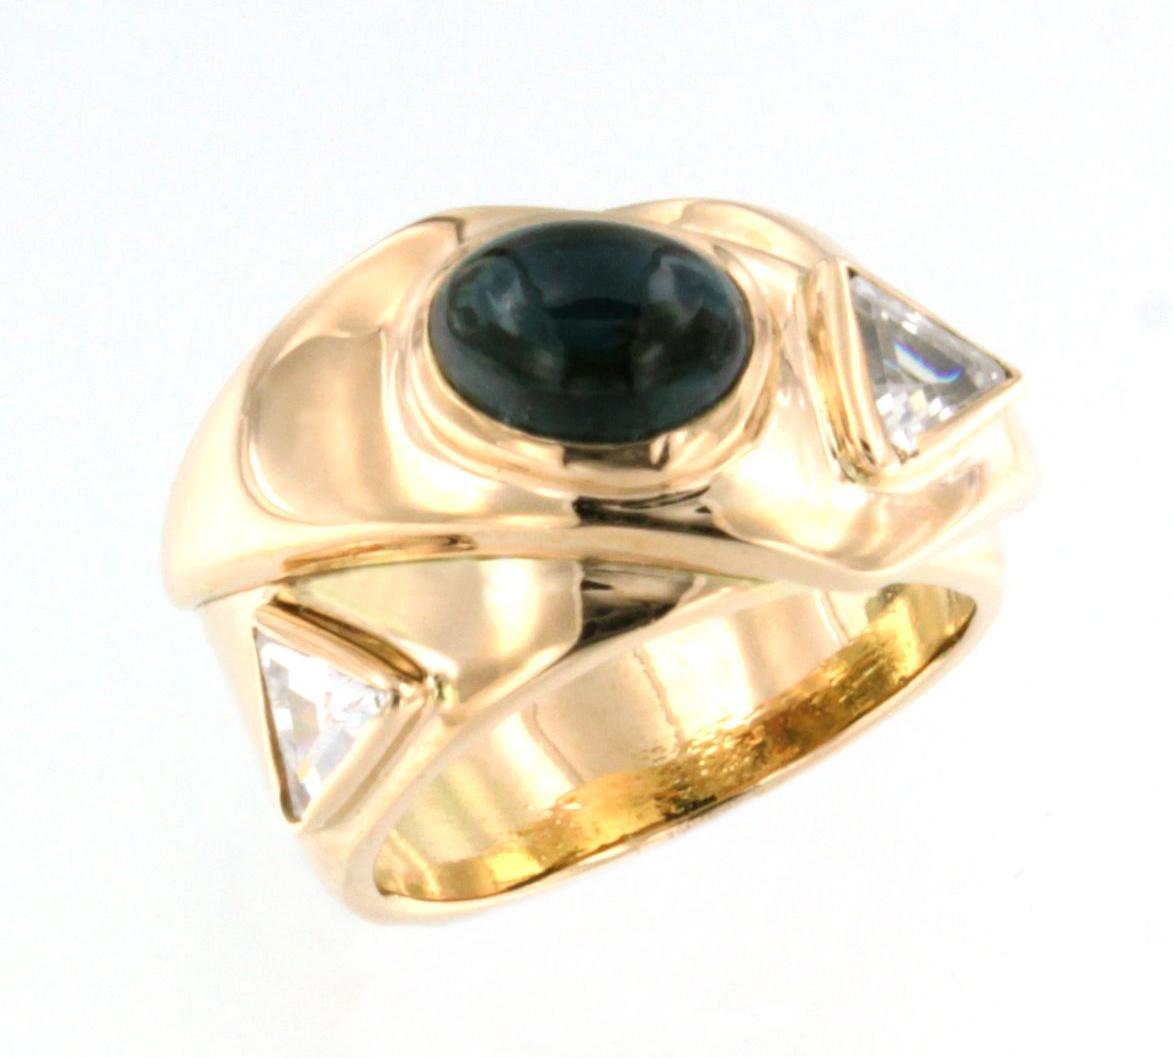 Modern 14kt Rose Gold with Green Tourmaline and Whit Triangular Swarovski Stone Ring For Sale